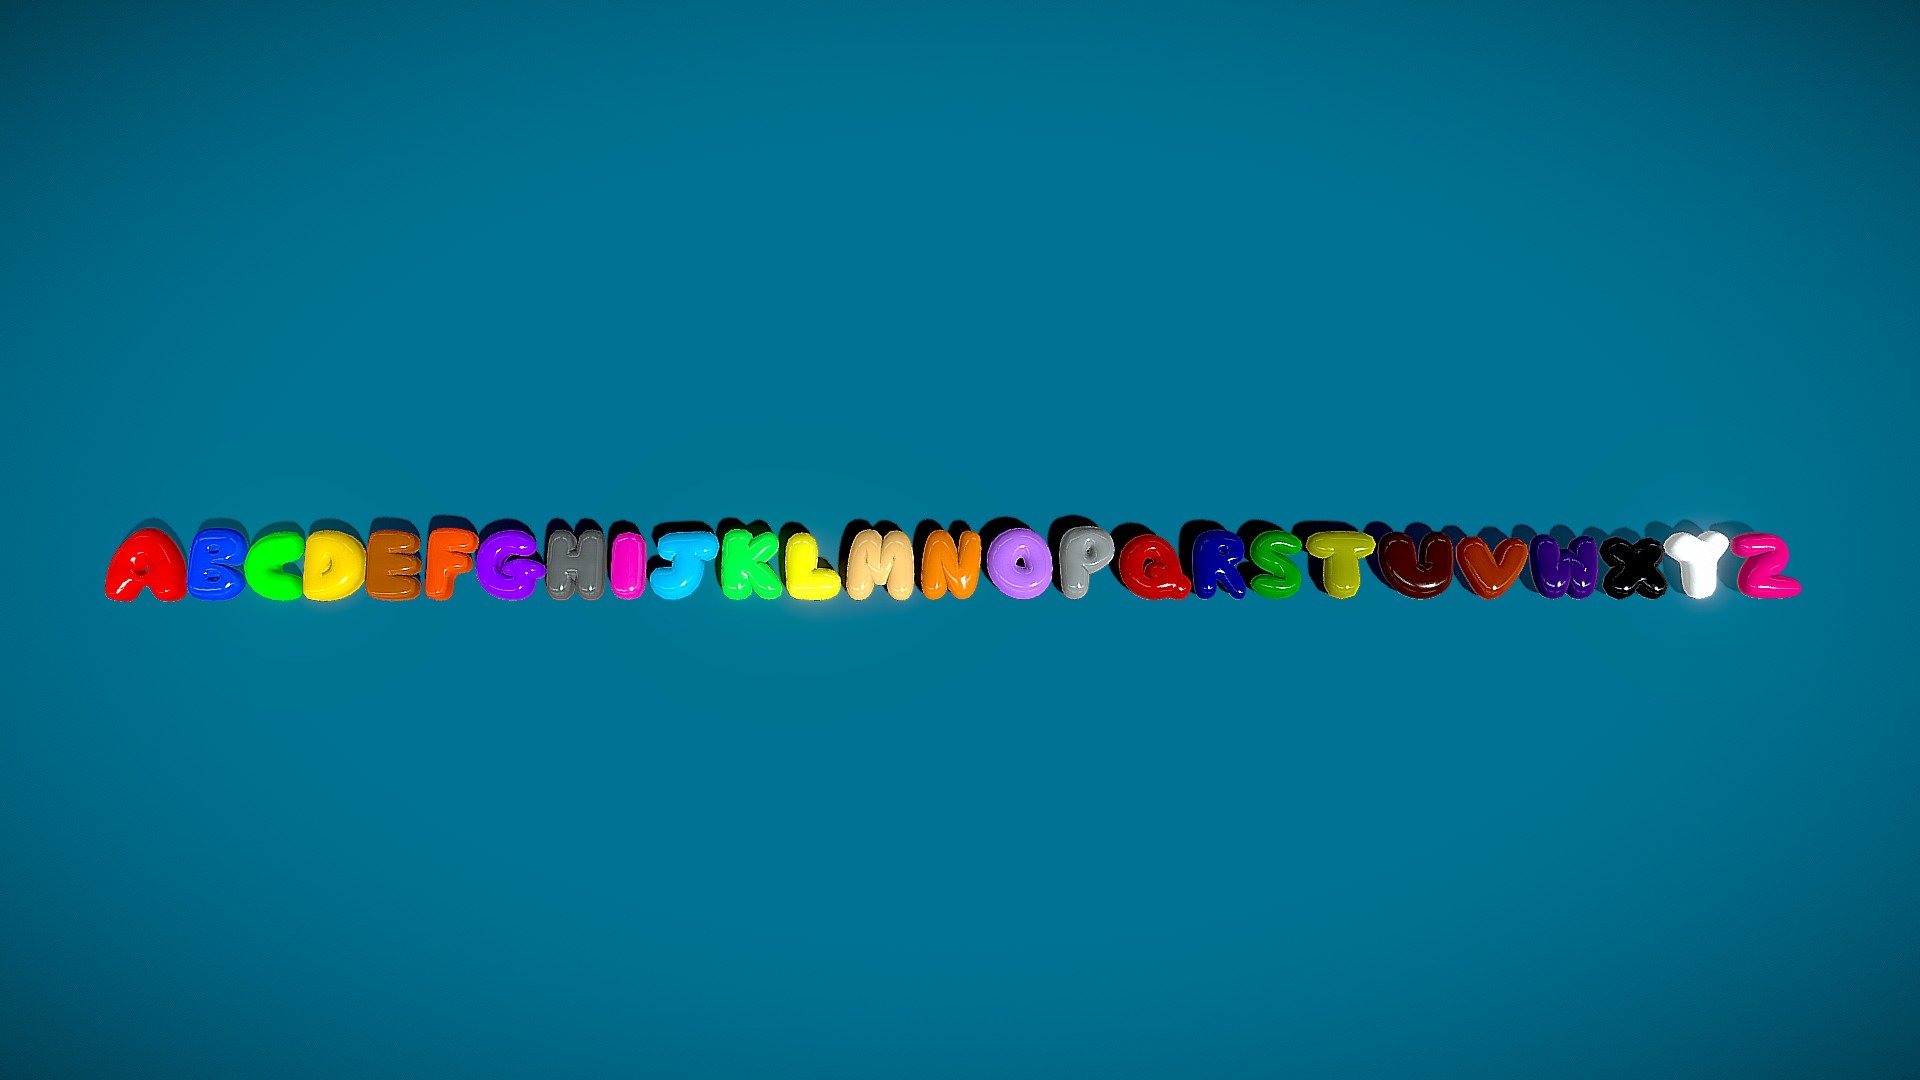 Bubble letter alphabet made using Blender 2.79 and the Cycles render engine.

Check out my blog at: https://rhcreations.tumblr.com/ - Bubble Letters - Download Free 3D model by rhcreations 3d model